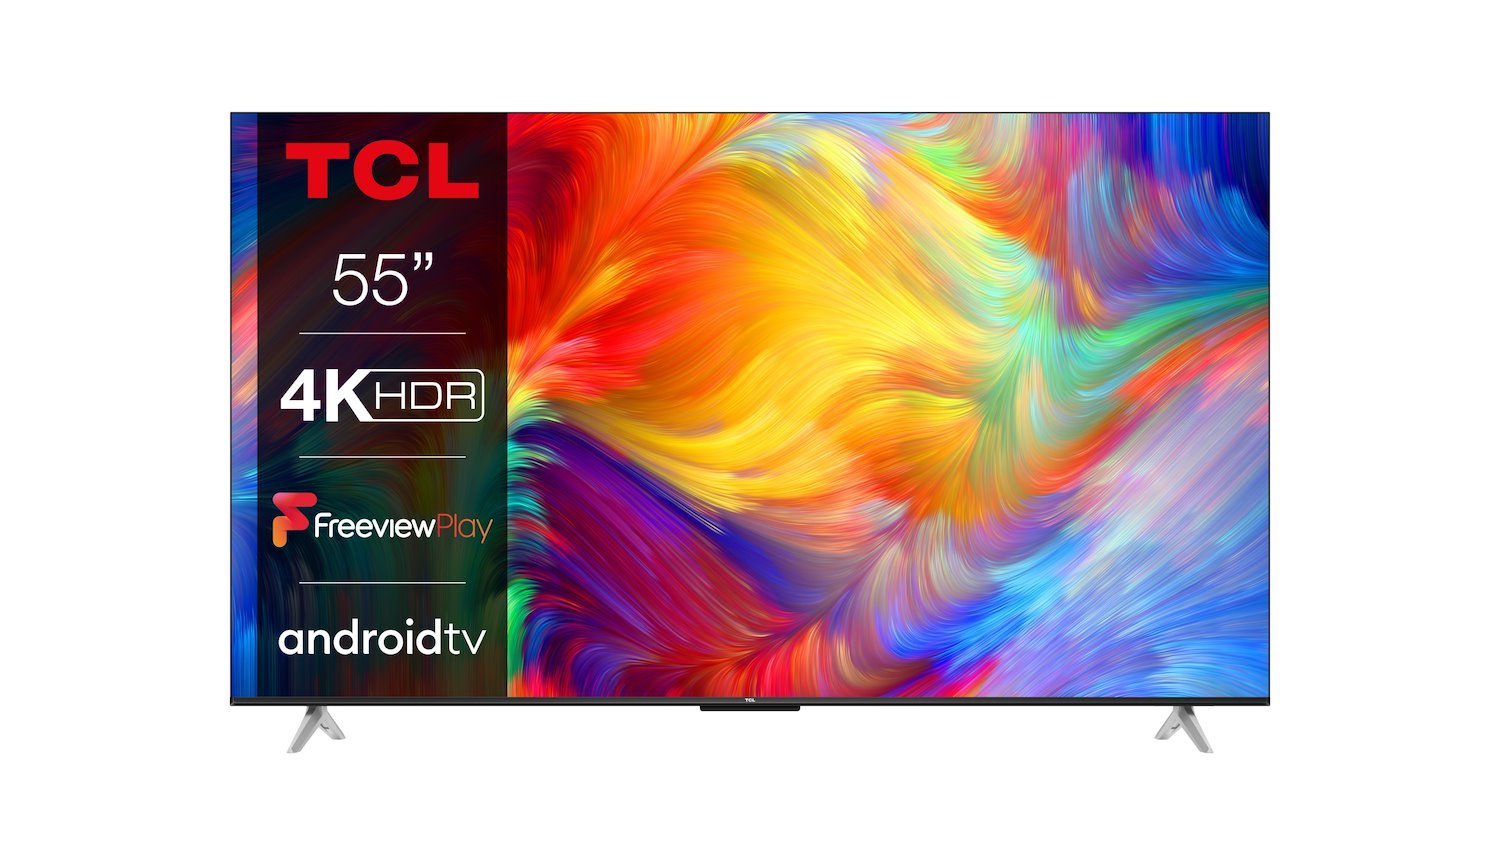 TCL 55P638K Television 4K HDR Ultra HD Smart TV Powered BY Android TV Bezeless Design (Freeview Play Game Master Dolby Audio HDR 10)